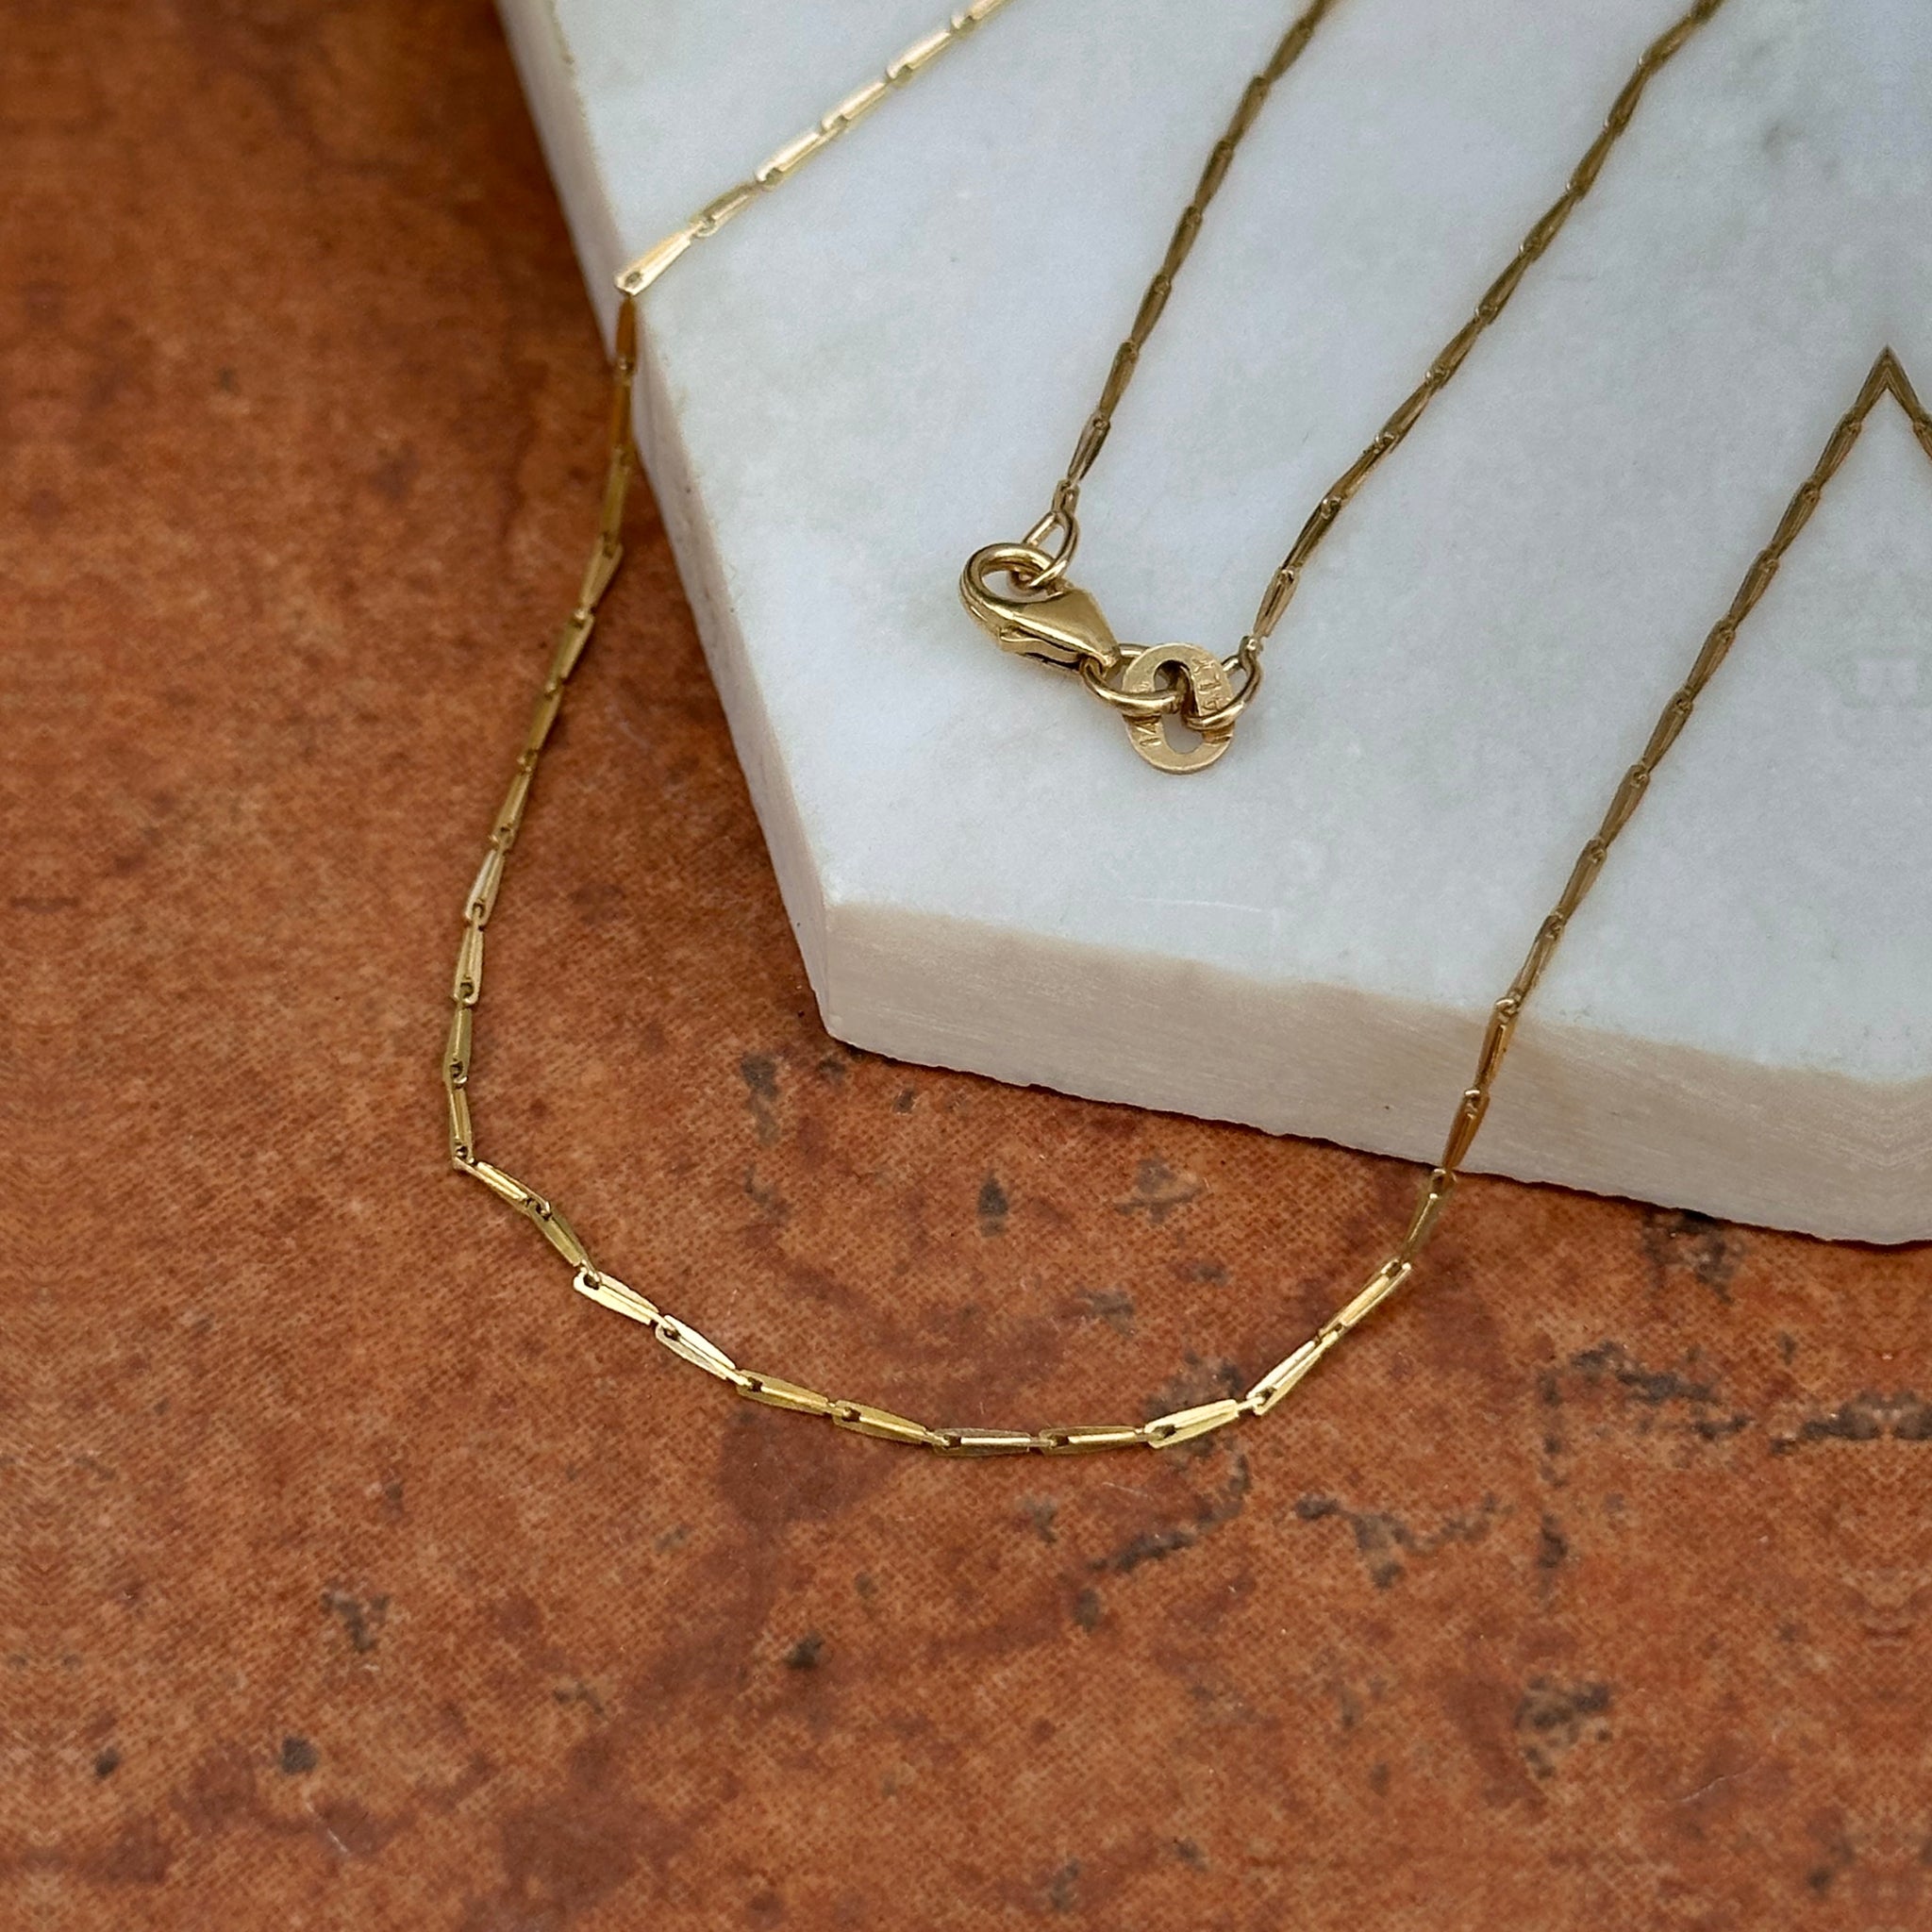 14KT Yellow Gold Elongated 1mm Line Link Chain Necklace – LSJ